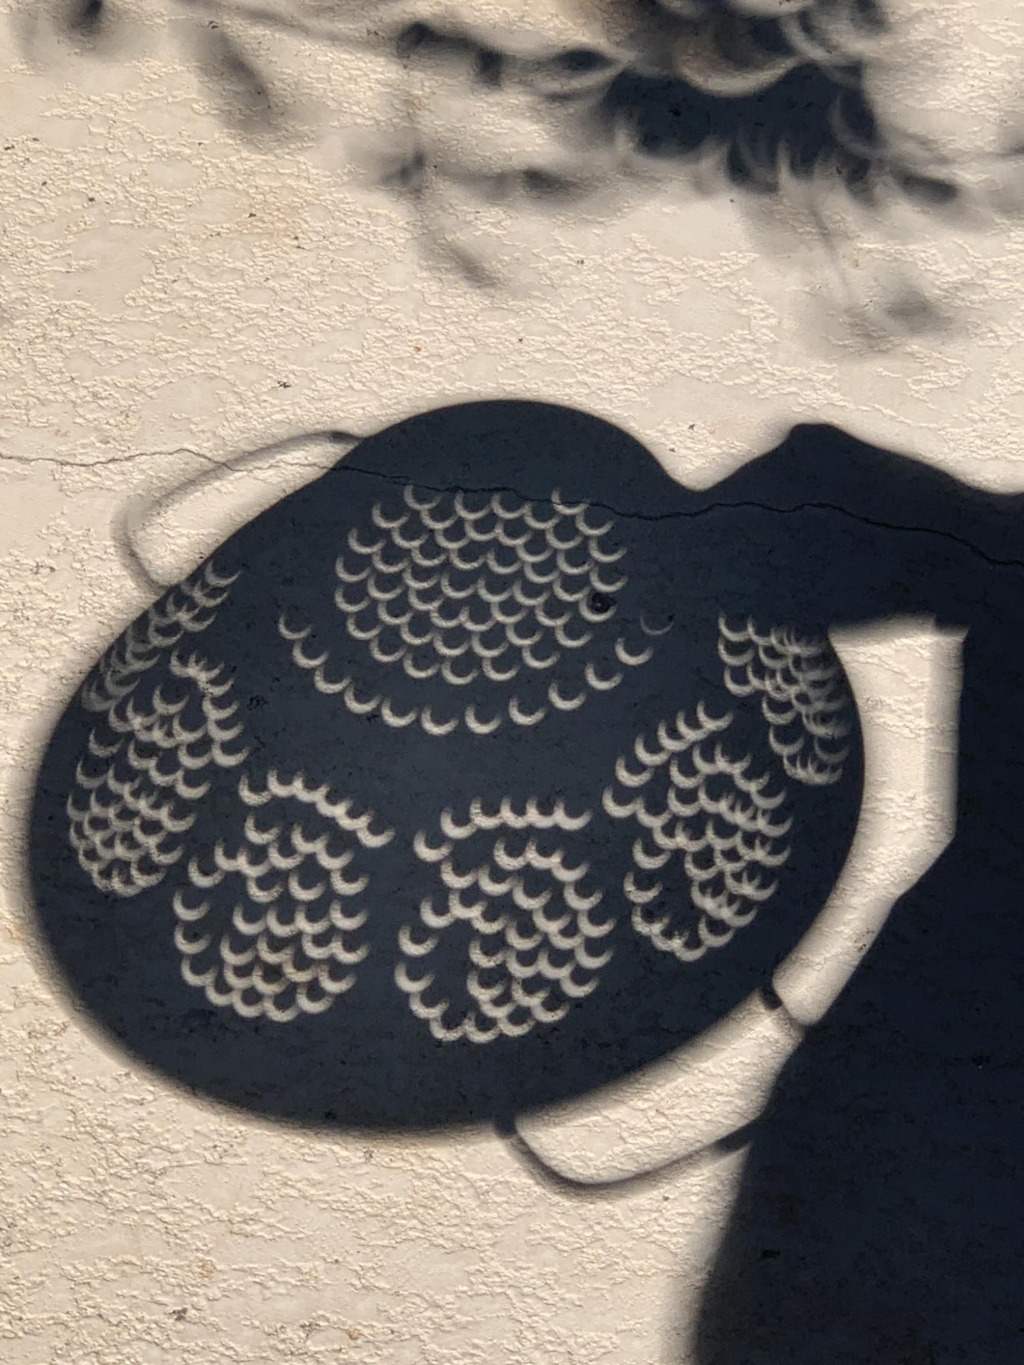 Eclipse through a colander's shadow by Michael Primm